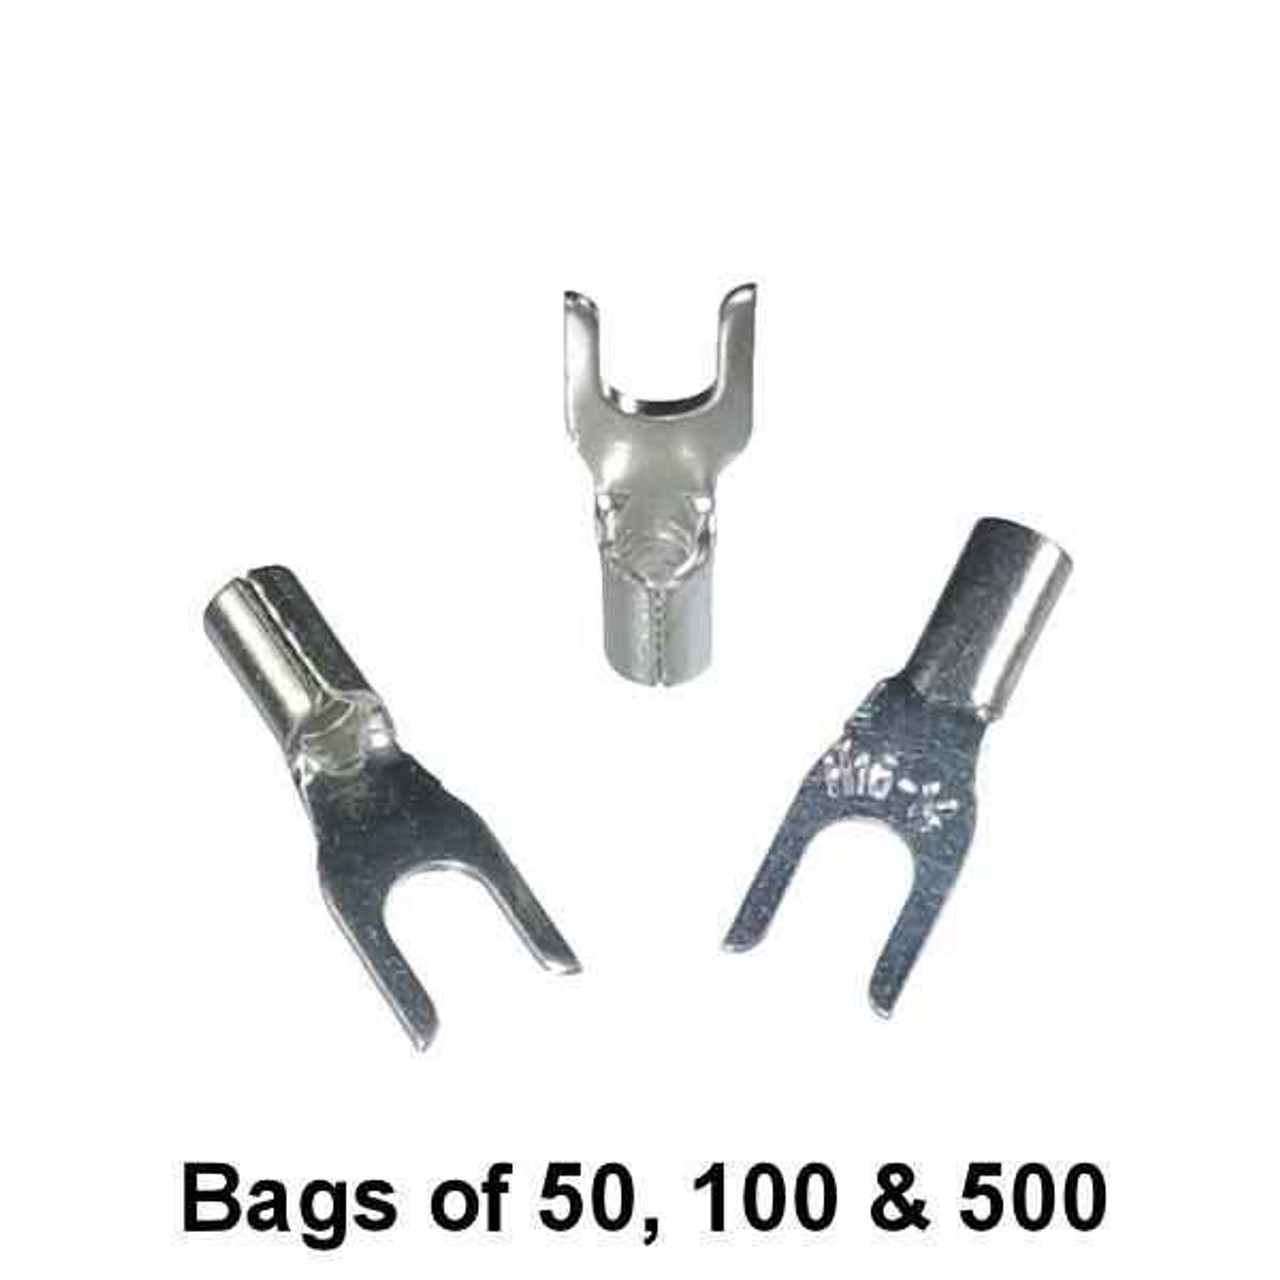 5/16 Clamps for #6 A/C Hose - Bag of 2